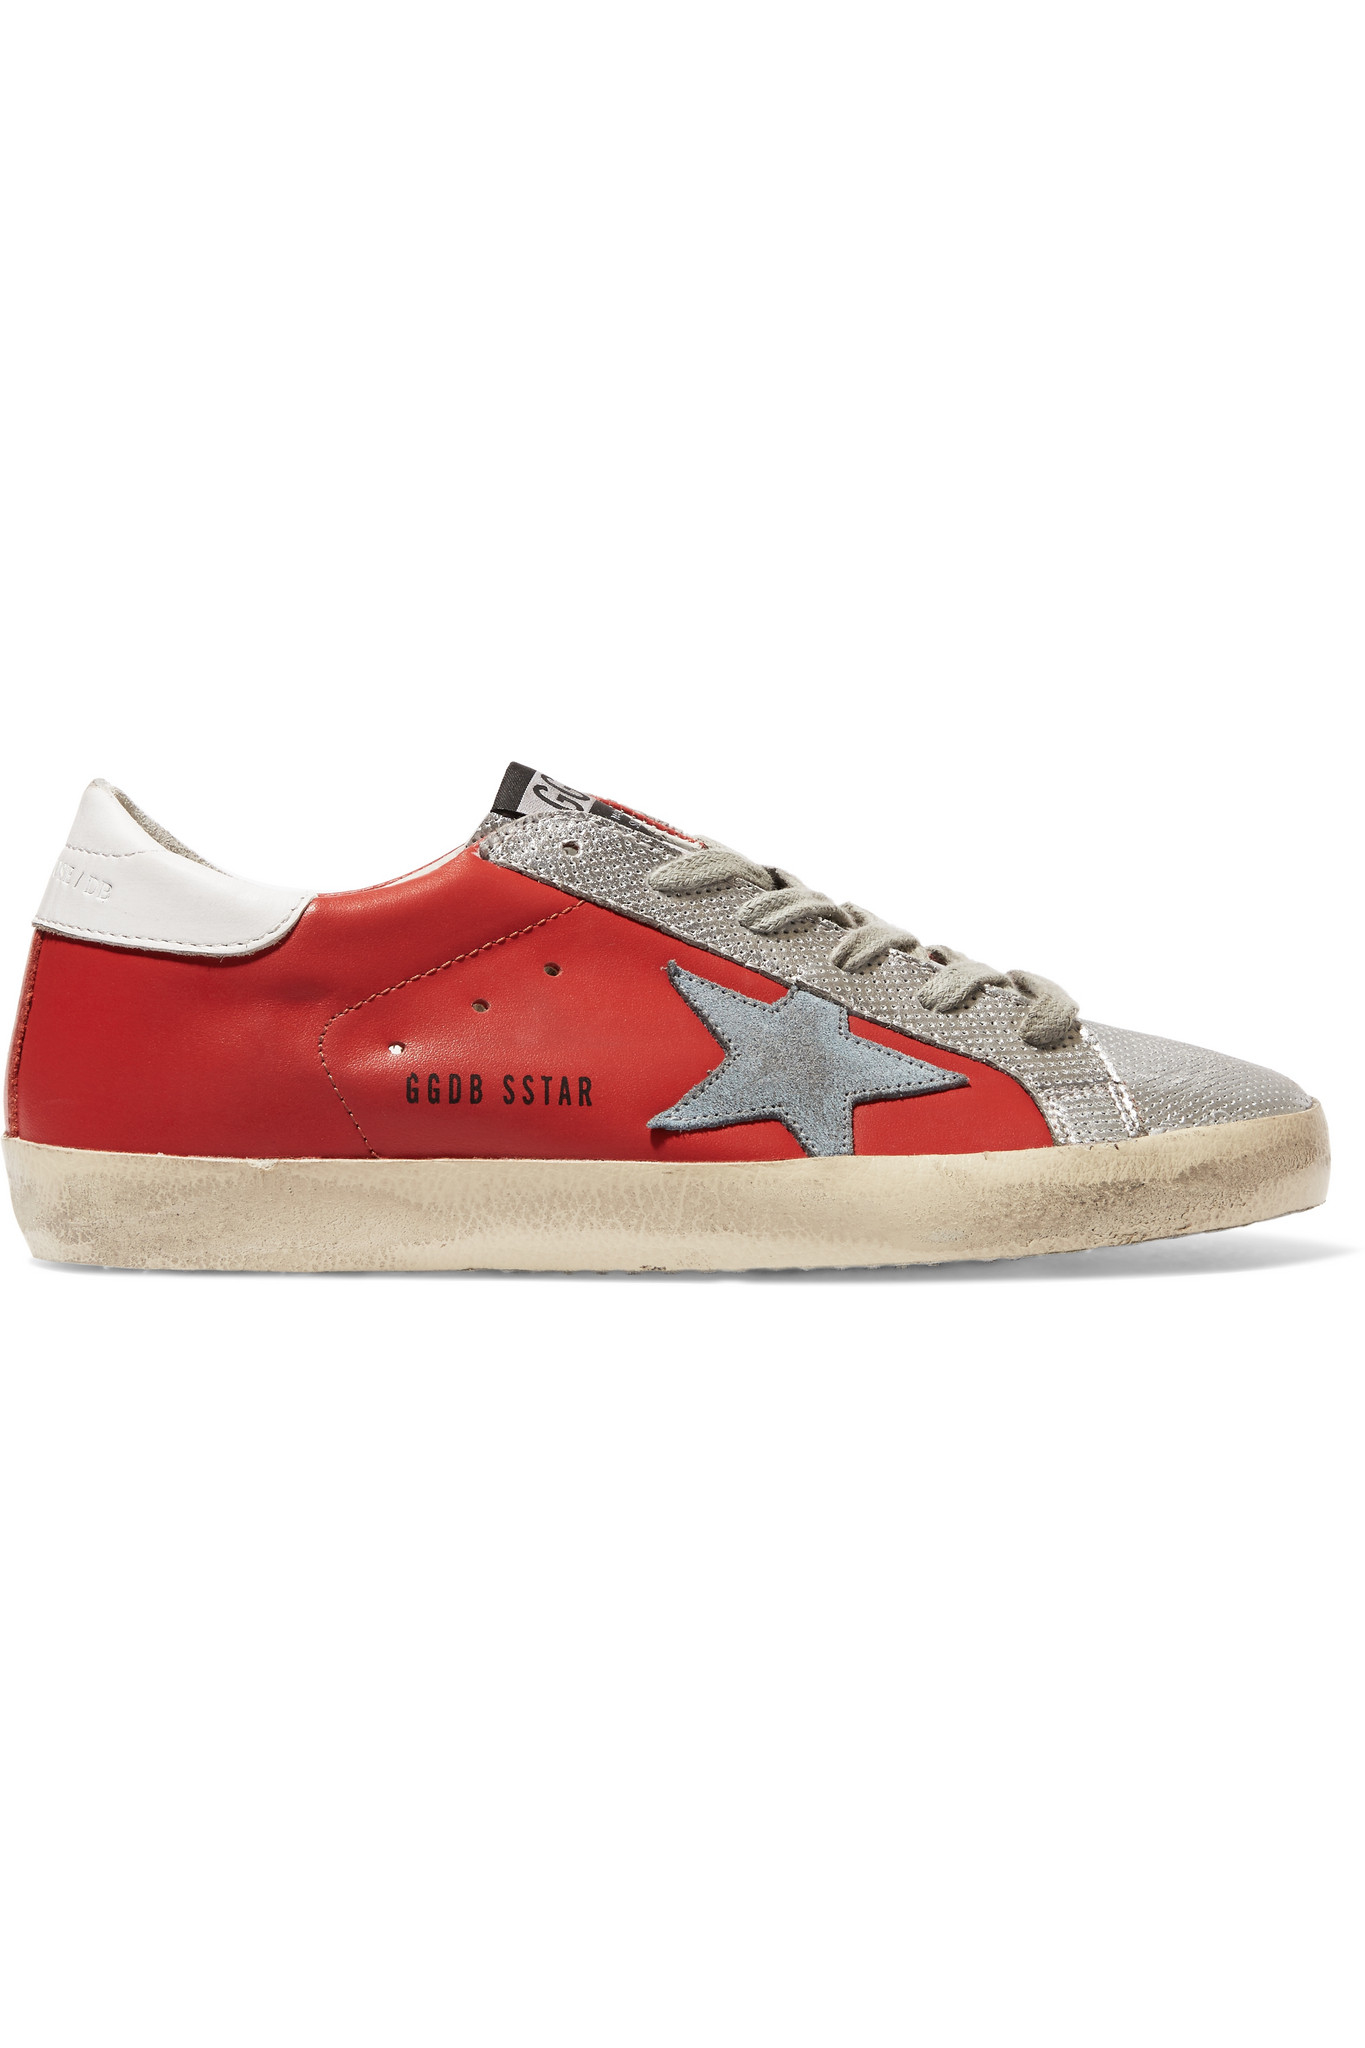 Golden Goose Super Star Metallic Distressed Leather Sneakers in Red | Lyst